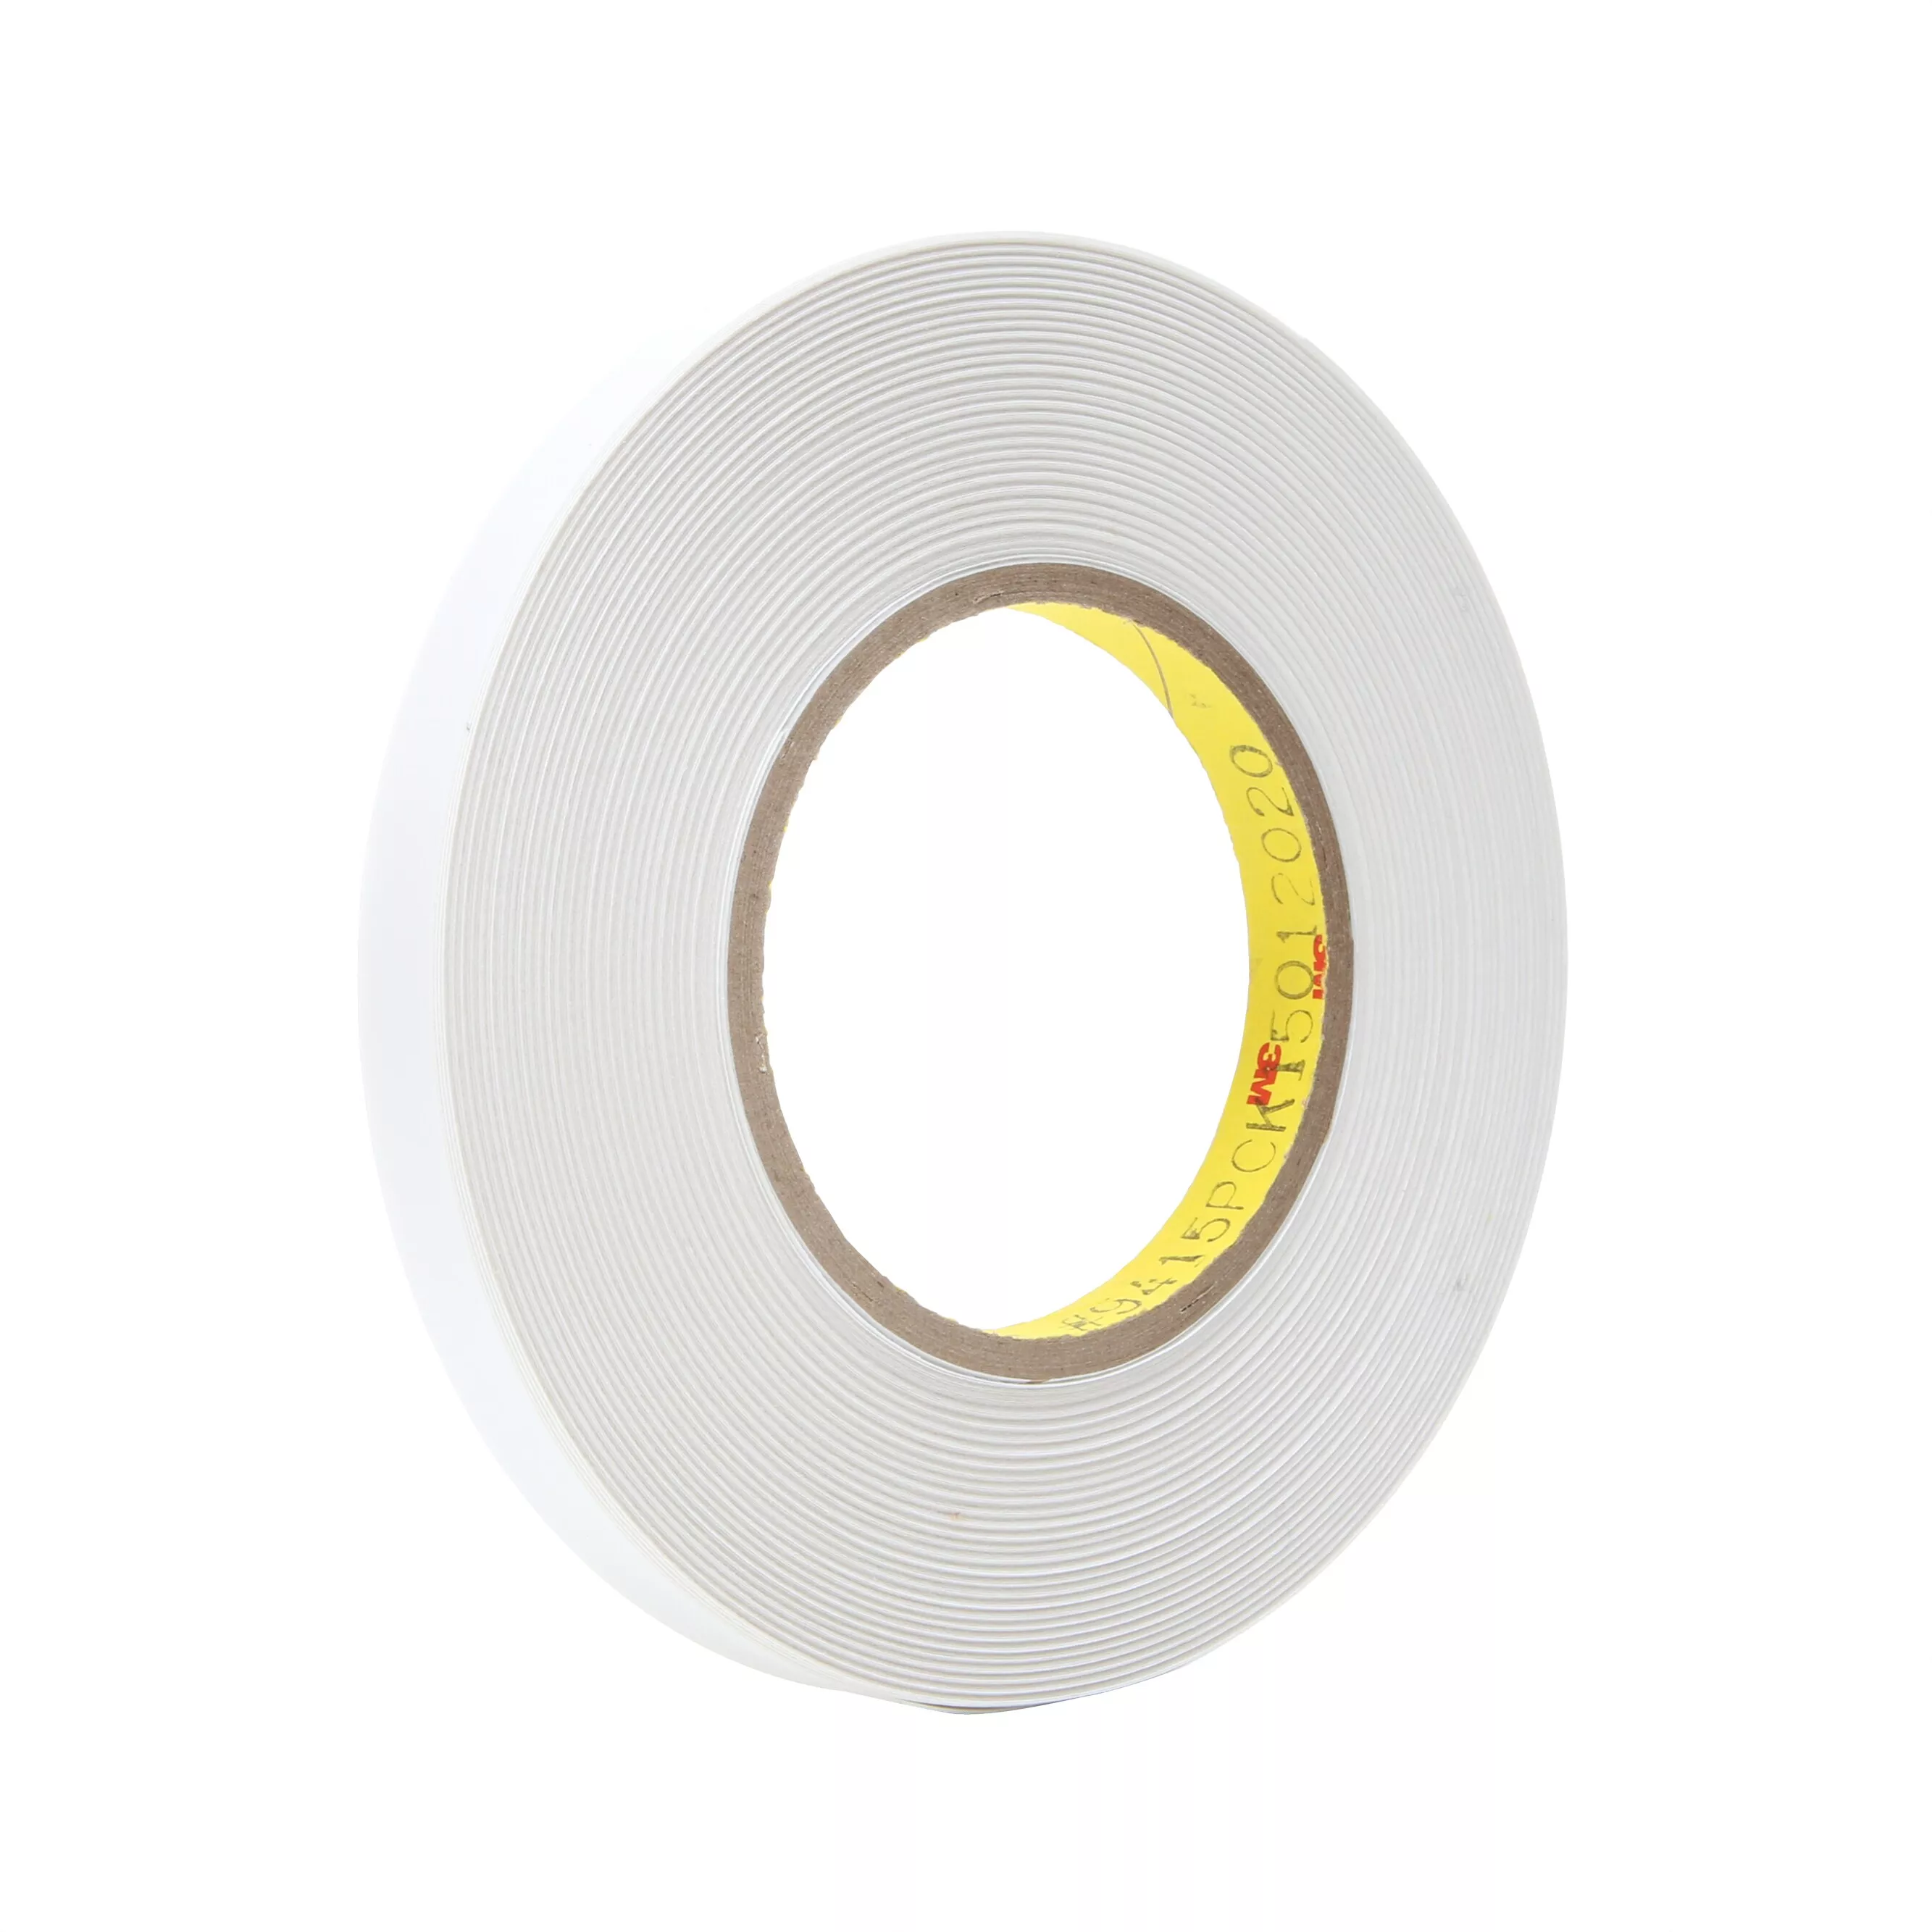 3M™ Removable Repositionable Tape 9415PC, Clear, 1 in x 144 yd, 2 mil, 9
Rolls/Case